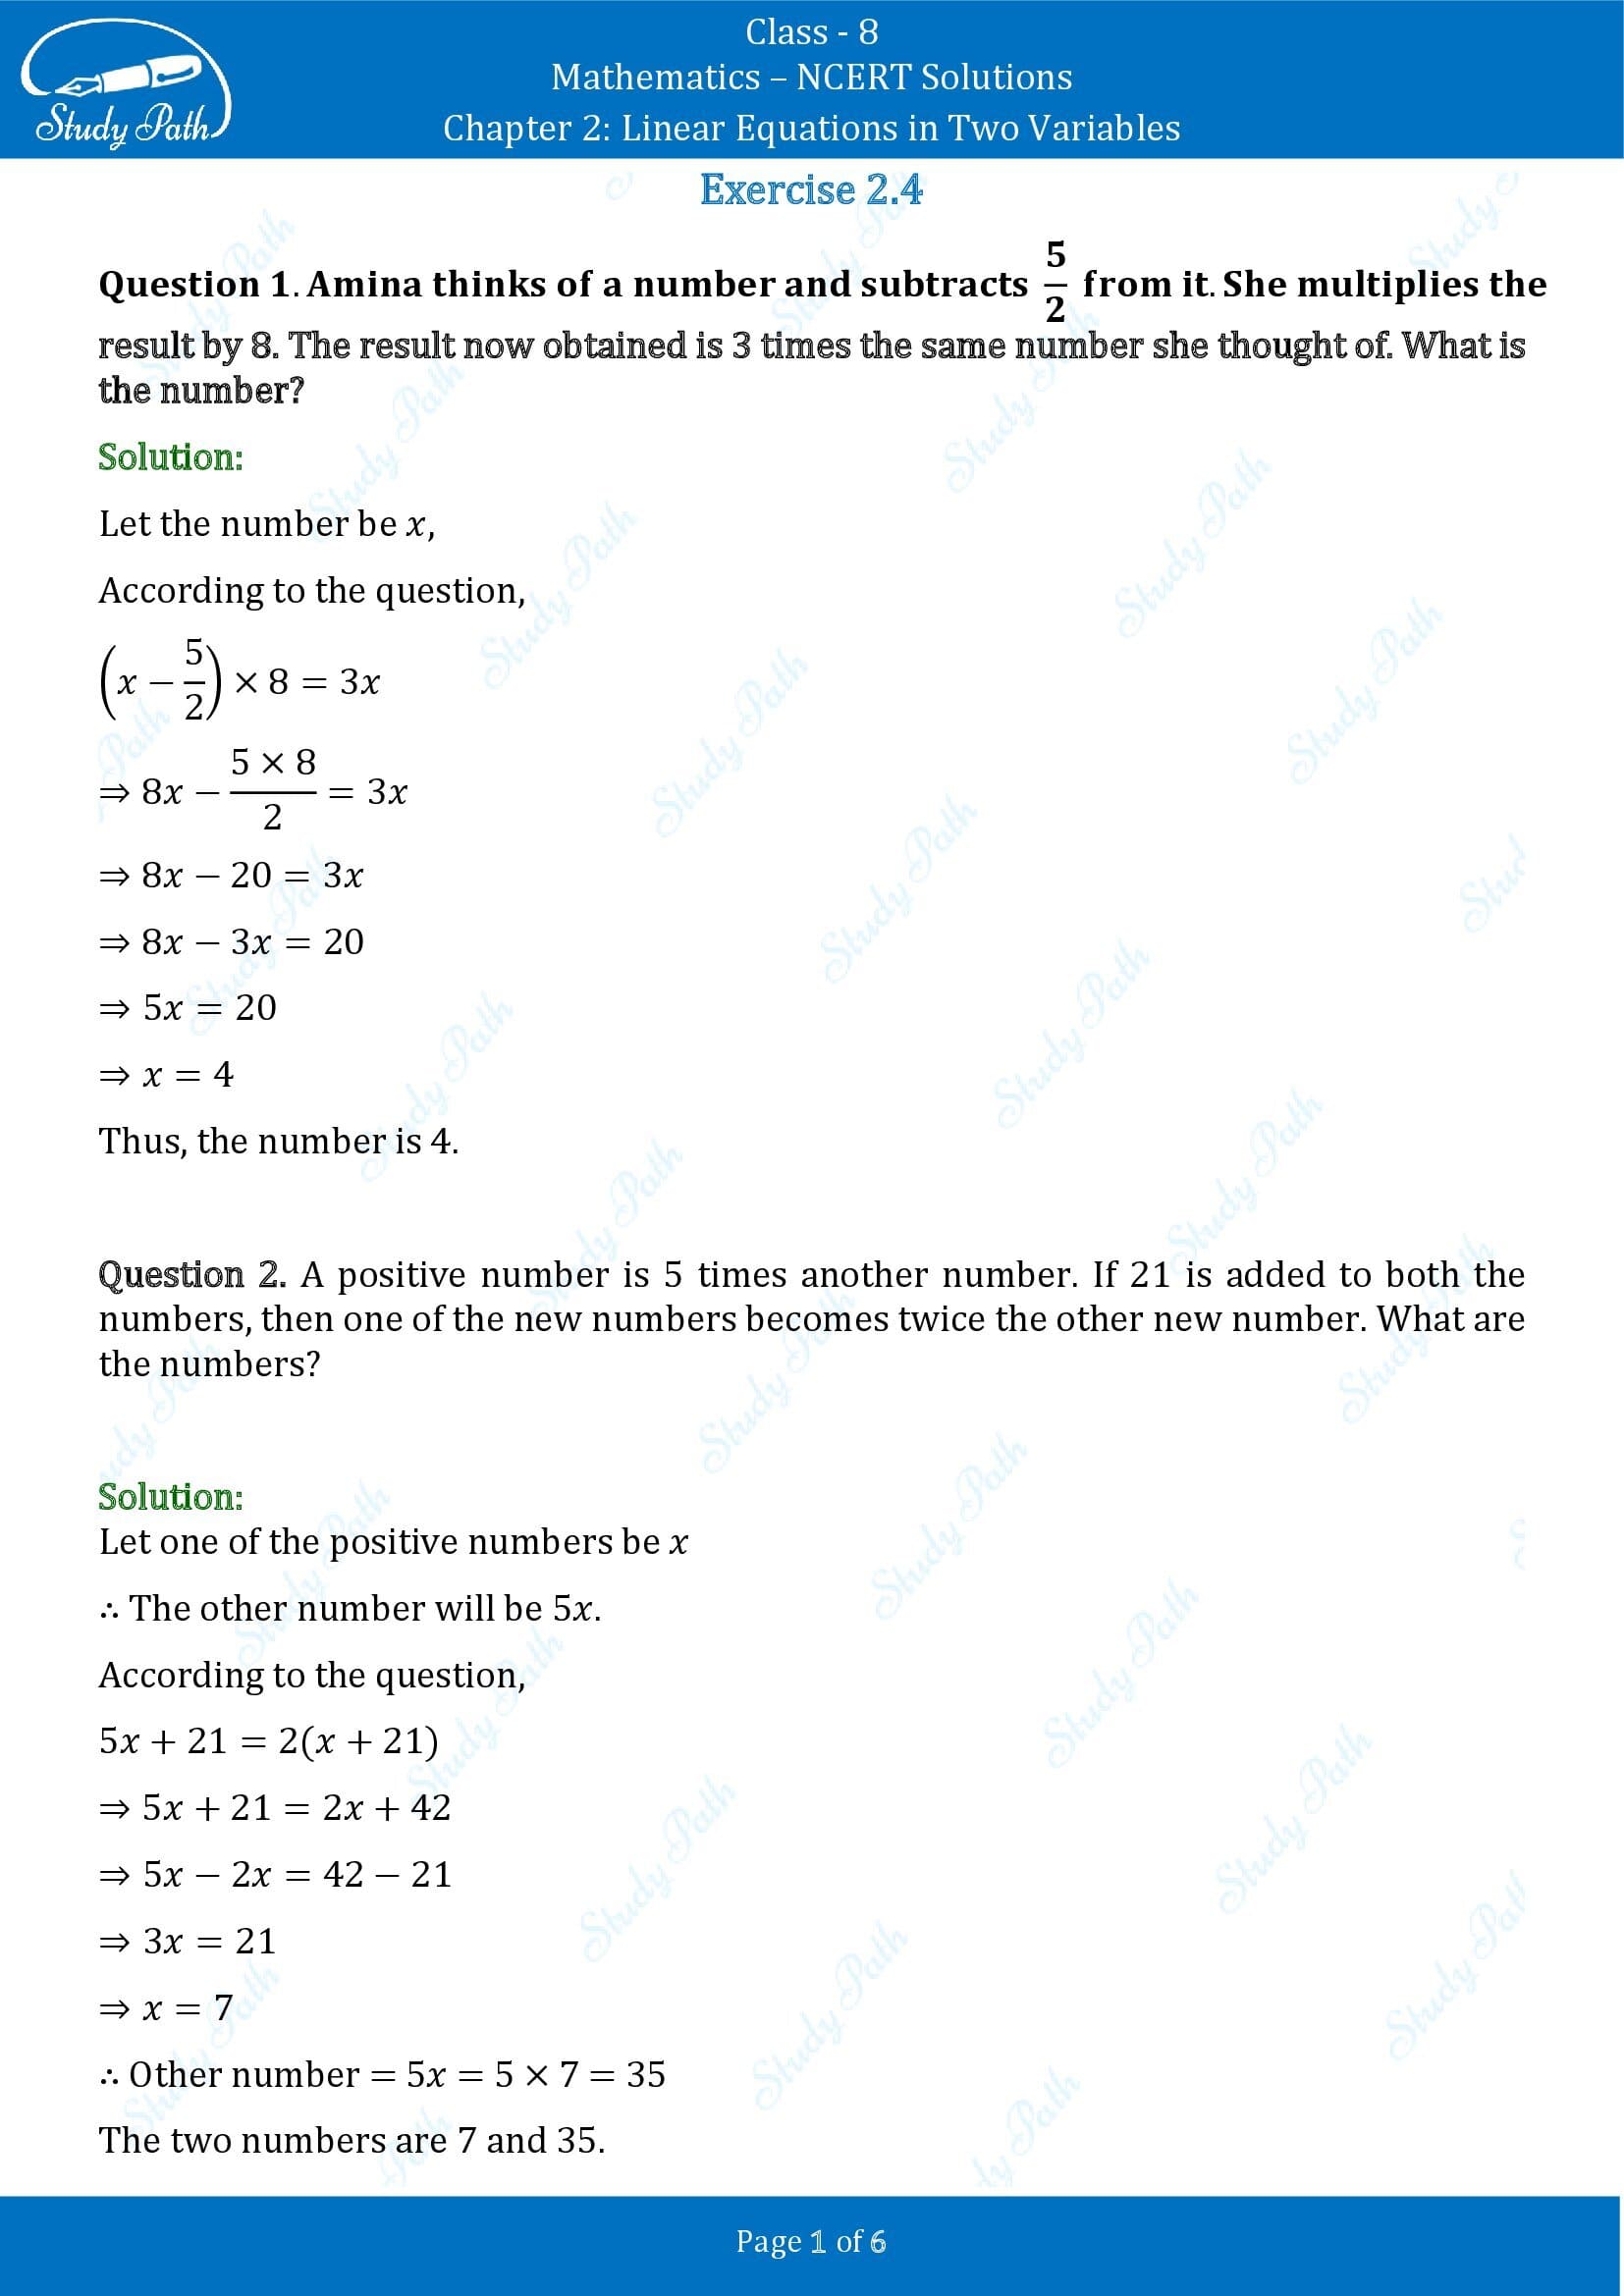 NCERT Solutions for Class 8 Maths Chapter 2 Linear Equations in Two Variables Exercise 2.4 00001